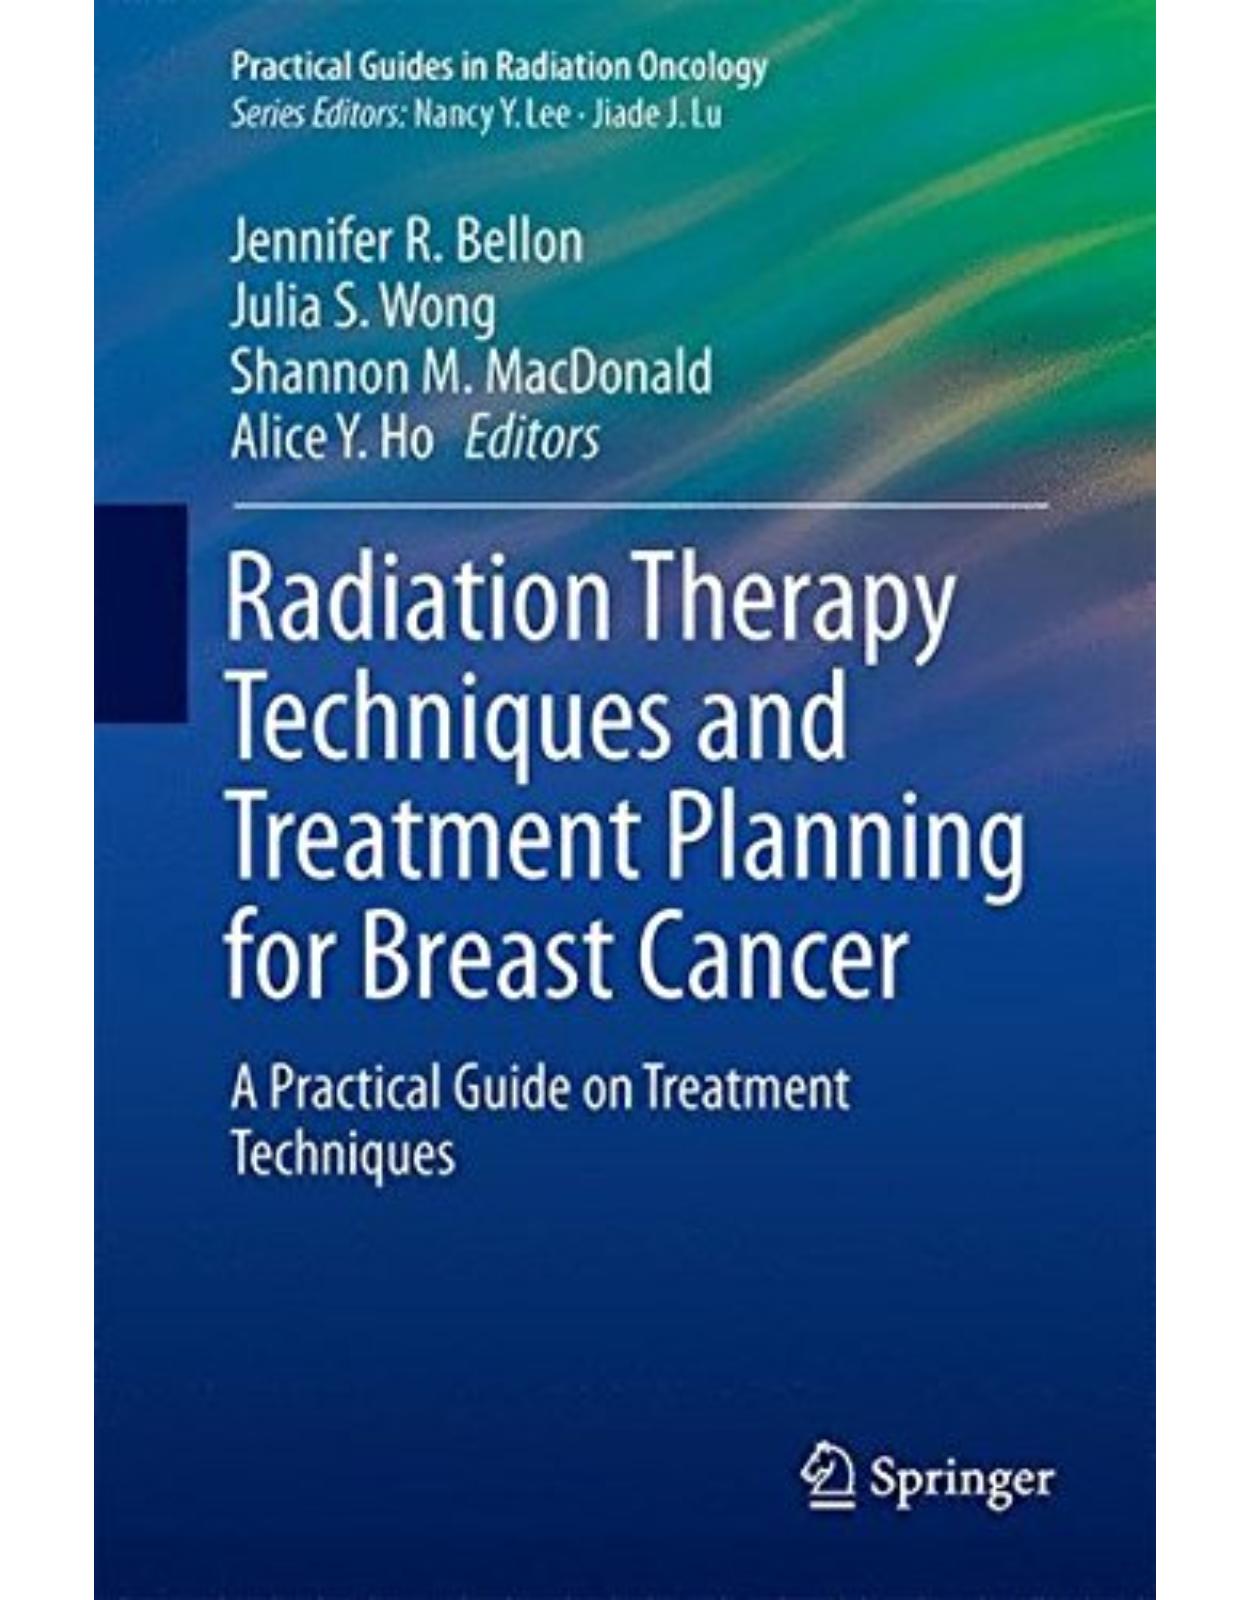 Radiation Therapy Techniques and Treatment Planning for Breast Cancer